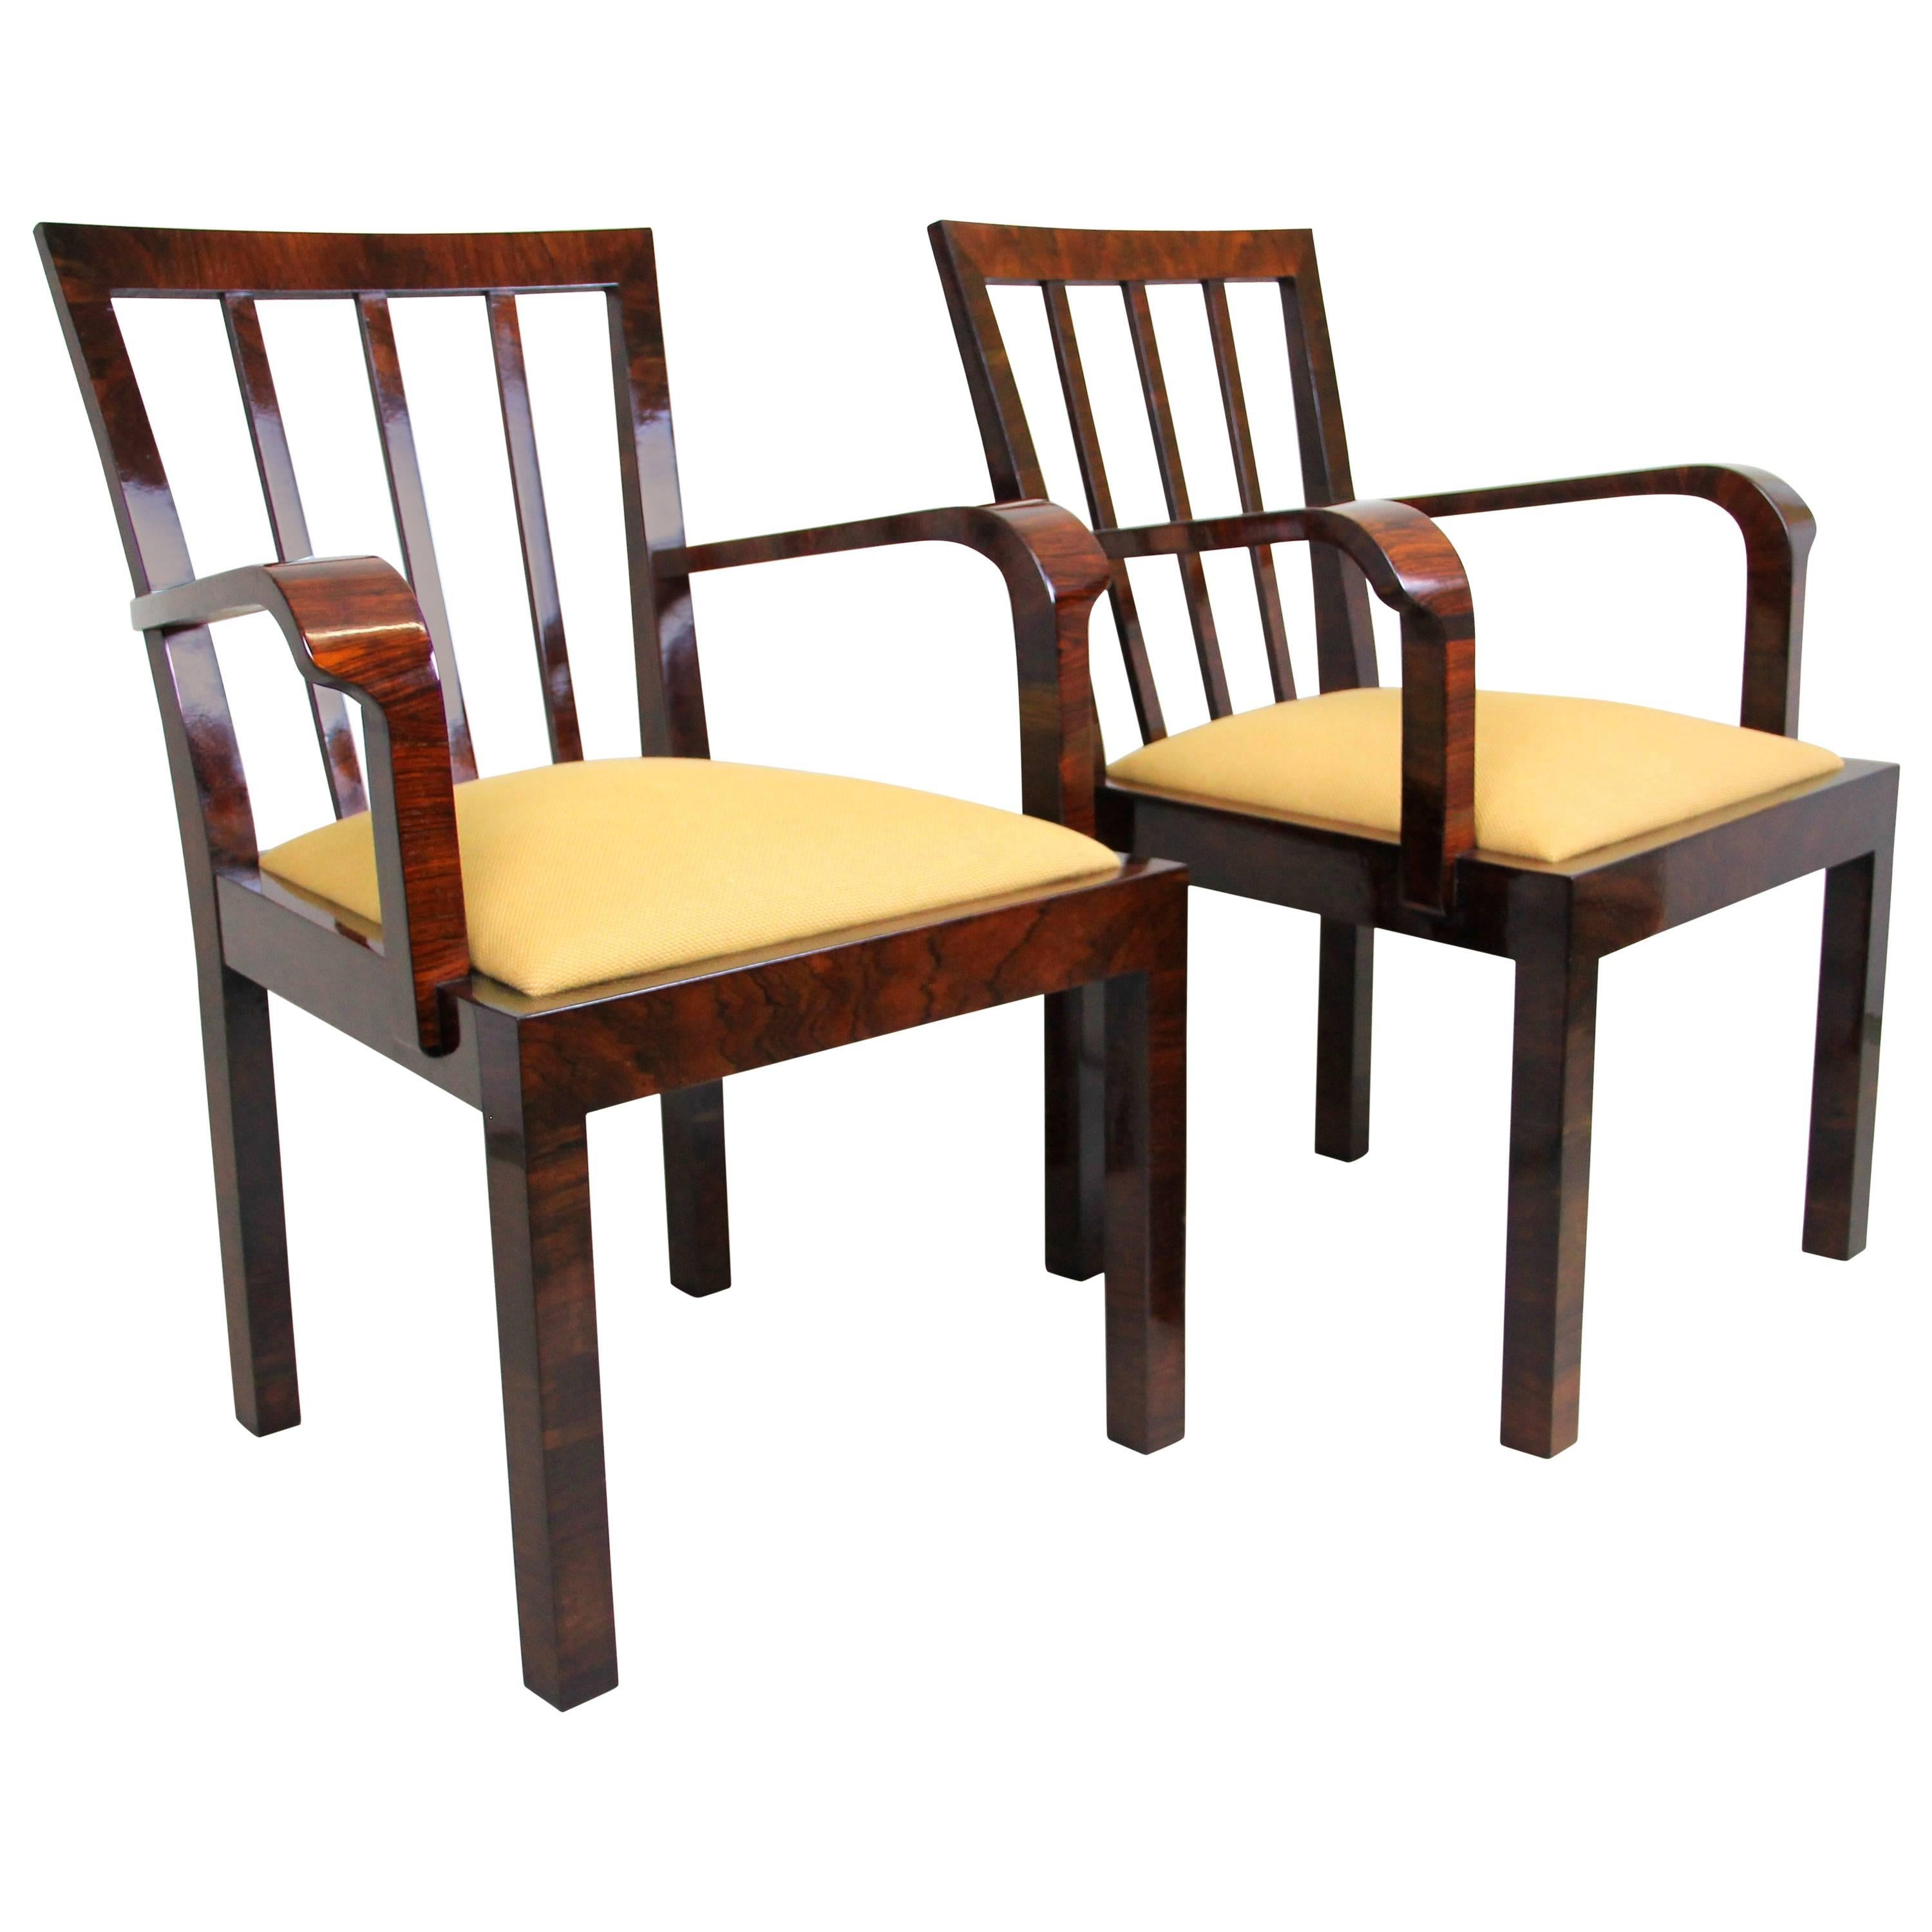 Stunning pair of Art Deco chairs handcrafted in Vienna - Austria during the period around 1930. A straight timeless design, veneered in great arranged nut wood and newly upholstered in premium Backhausen fabric makes this pair a fantastic edition to